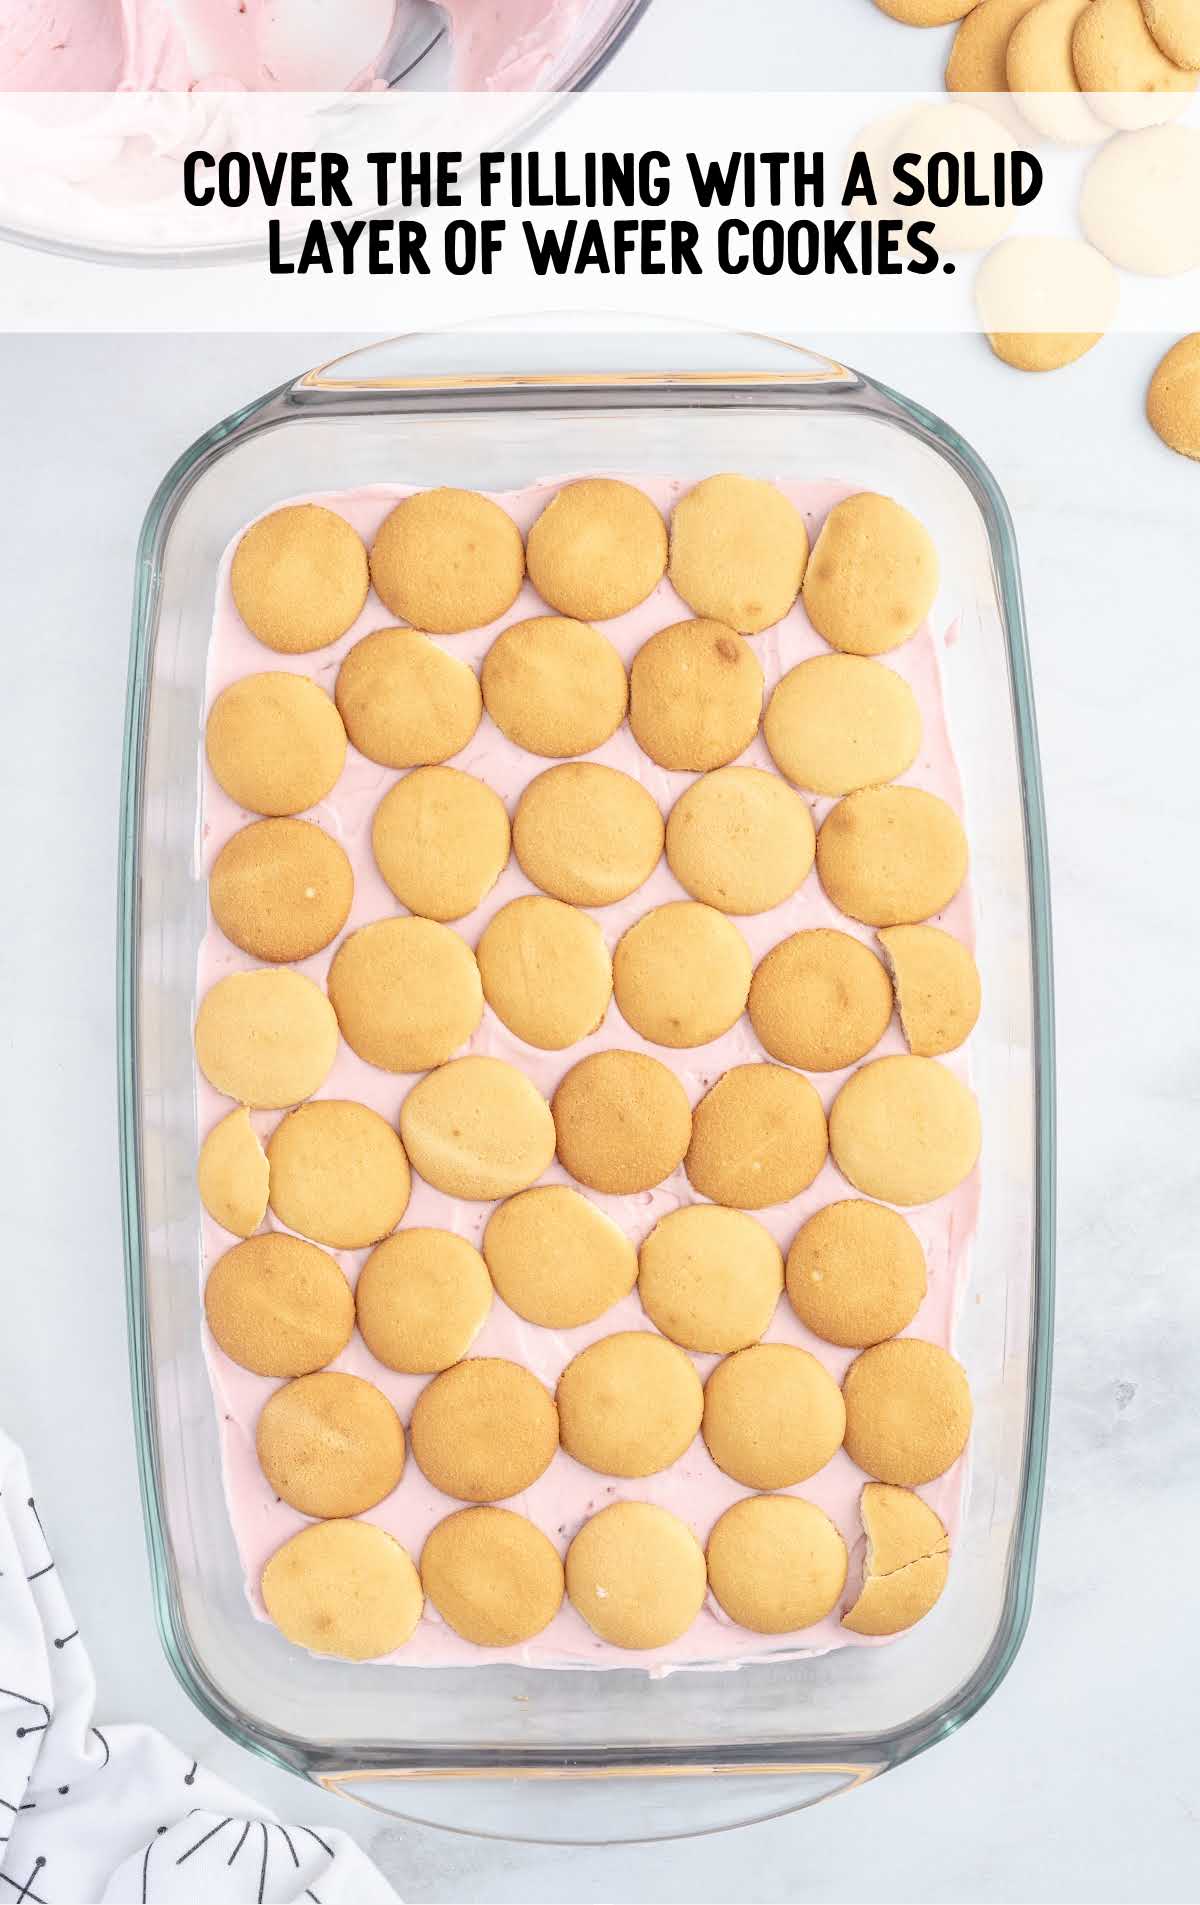 fillings covered with wafer cookies in a baking dish